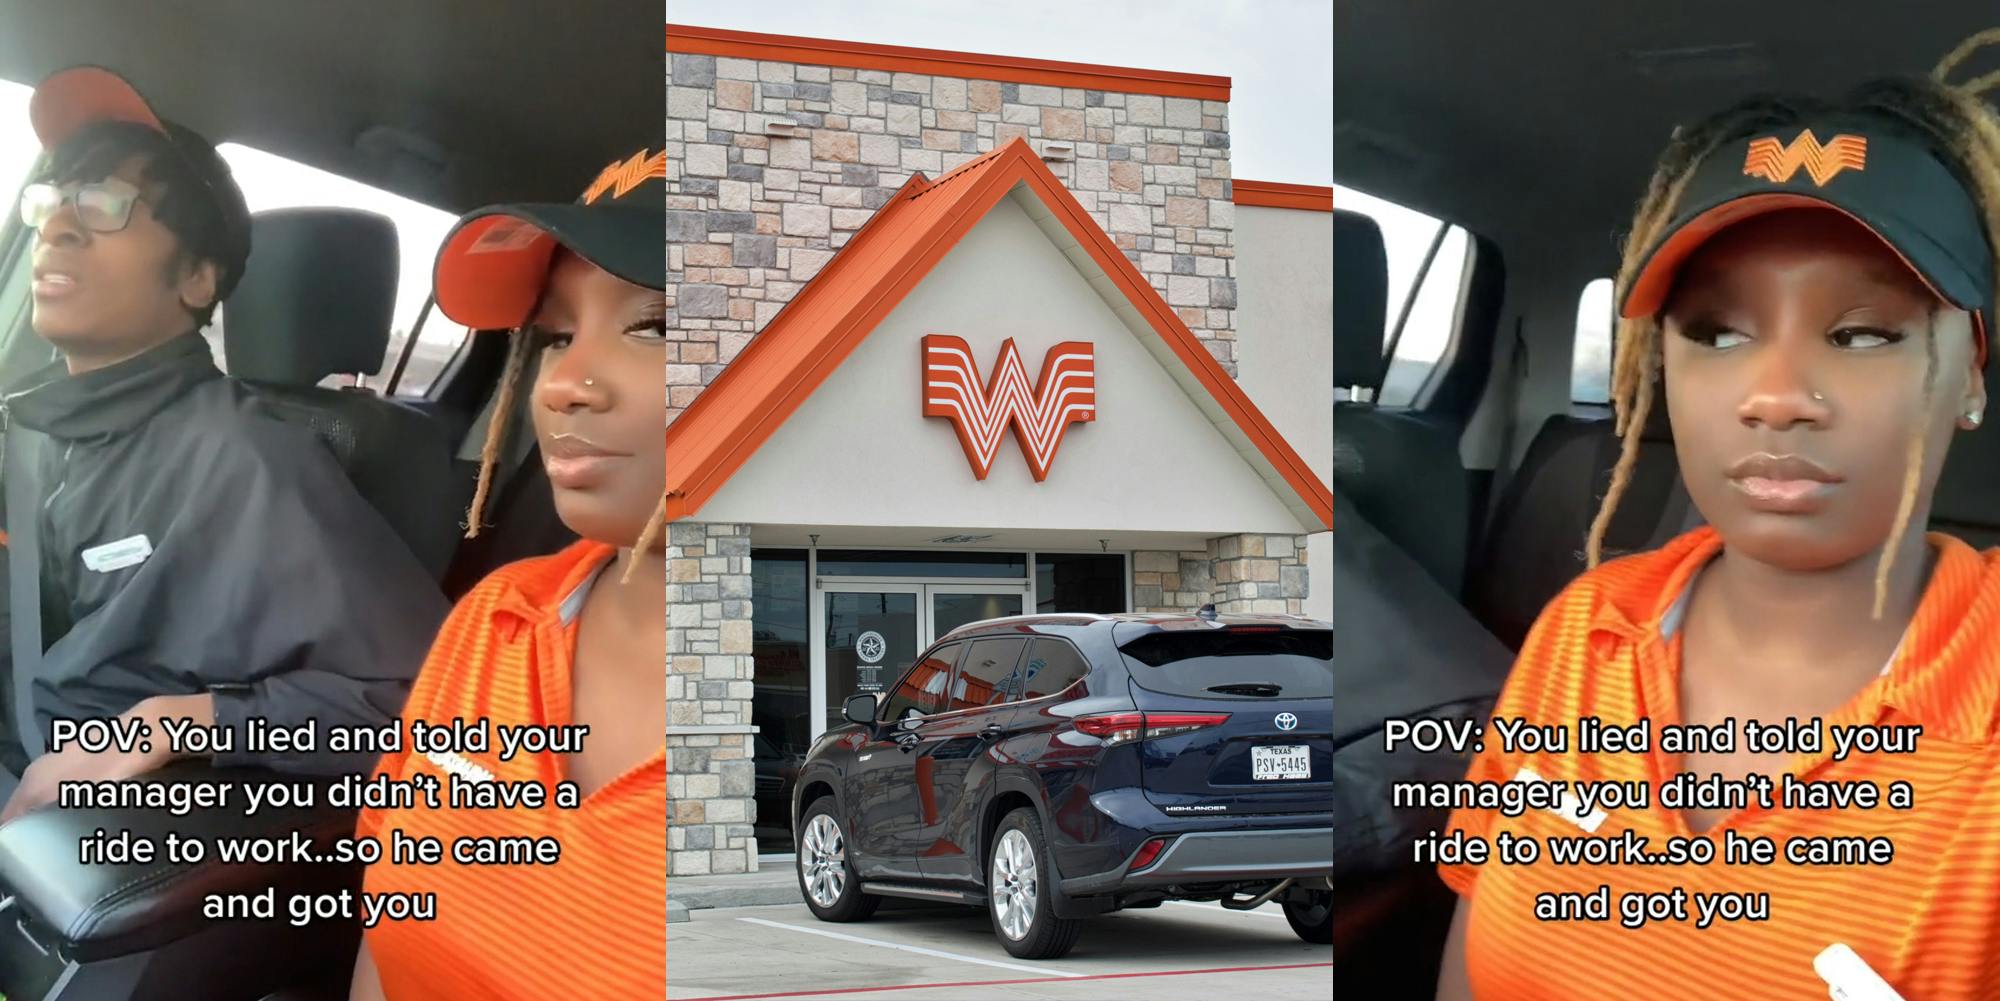 Whataburger manager and employee in car with caption "POV: You lied and told your manager you didn't have a ride to work...so he came and got you" (l) Whataburger building with sign and car parked out front (c) Whataburger employee in car with caption "POV: You lied and told your manager you didn't have a ride to work...so he came and got you" (r)